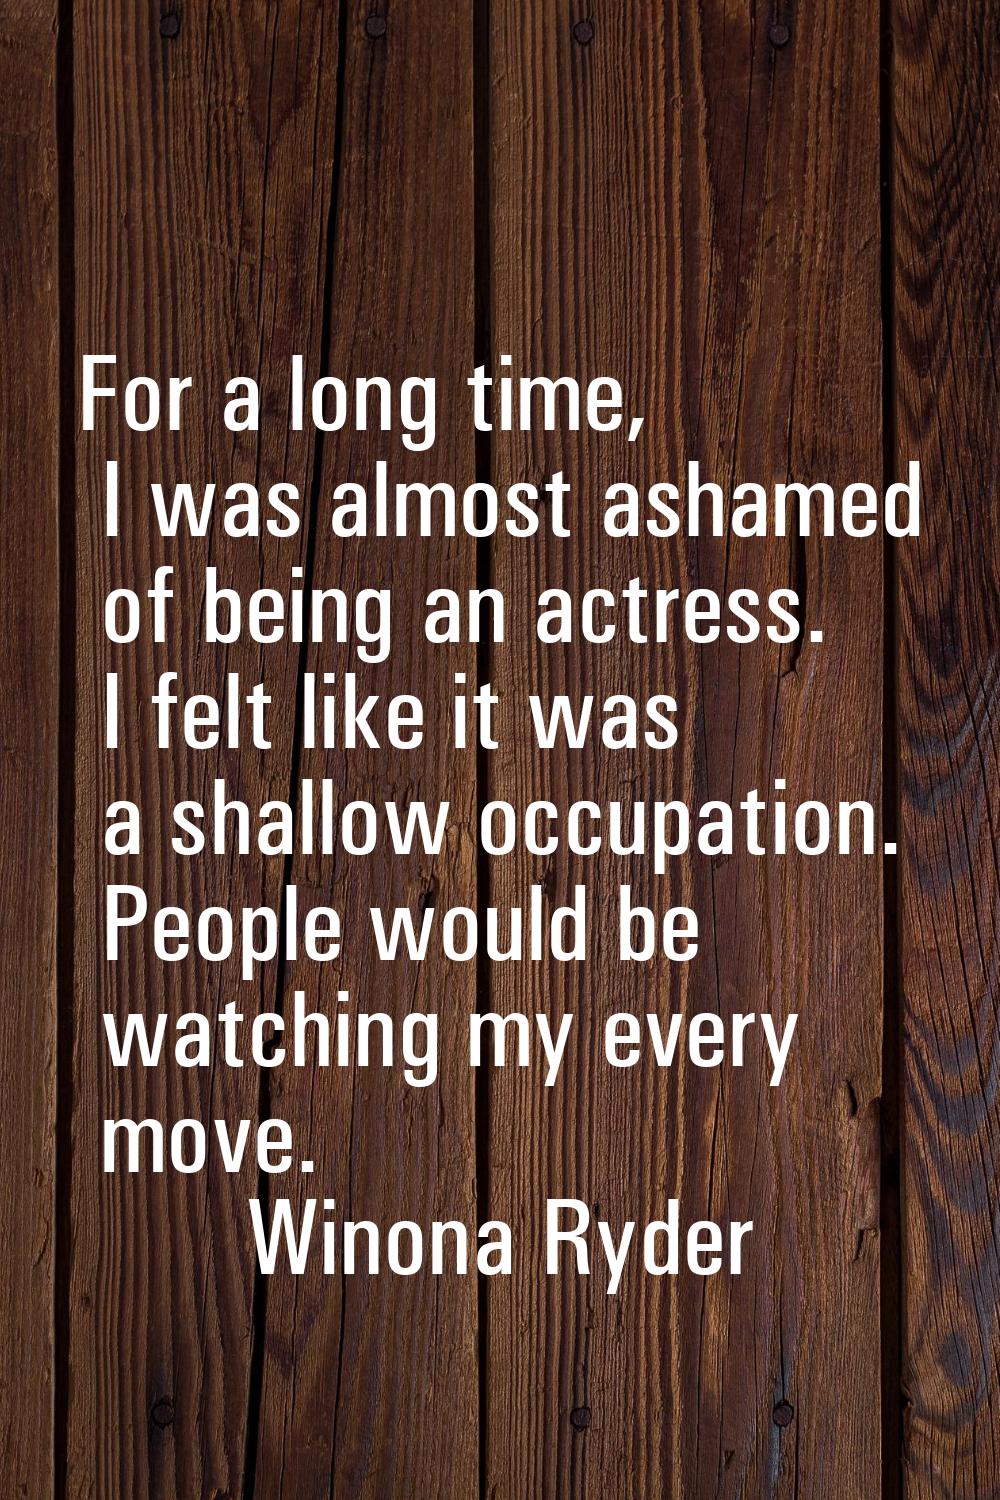 For a long time, I was almost ashamed of being an actress. I felt like it was a shallow occupation.